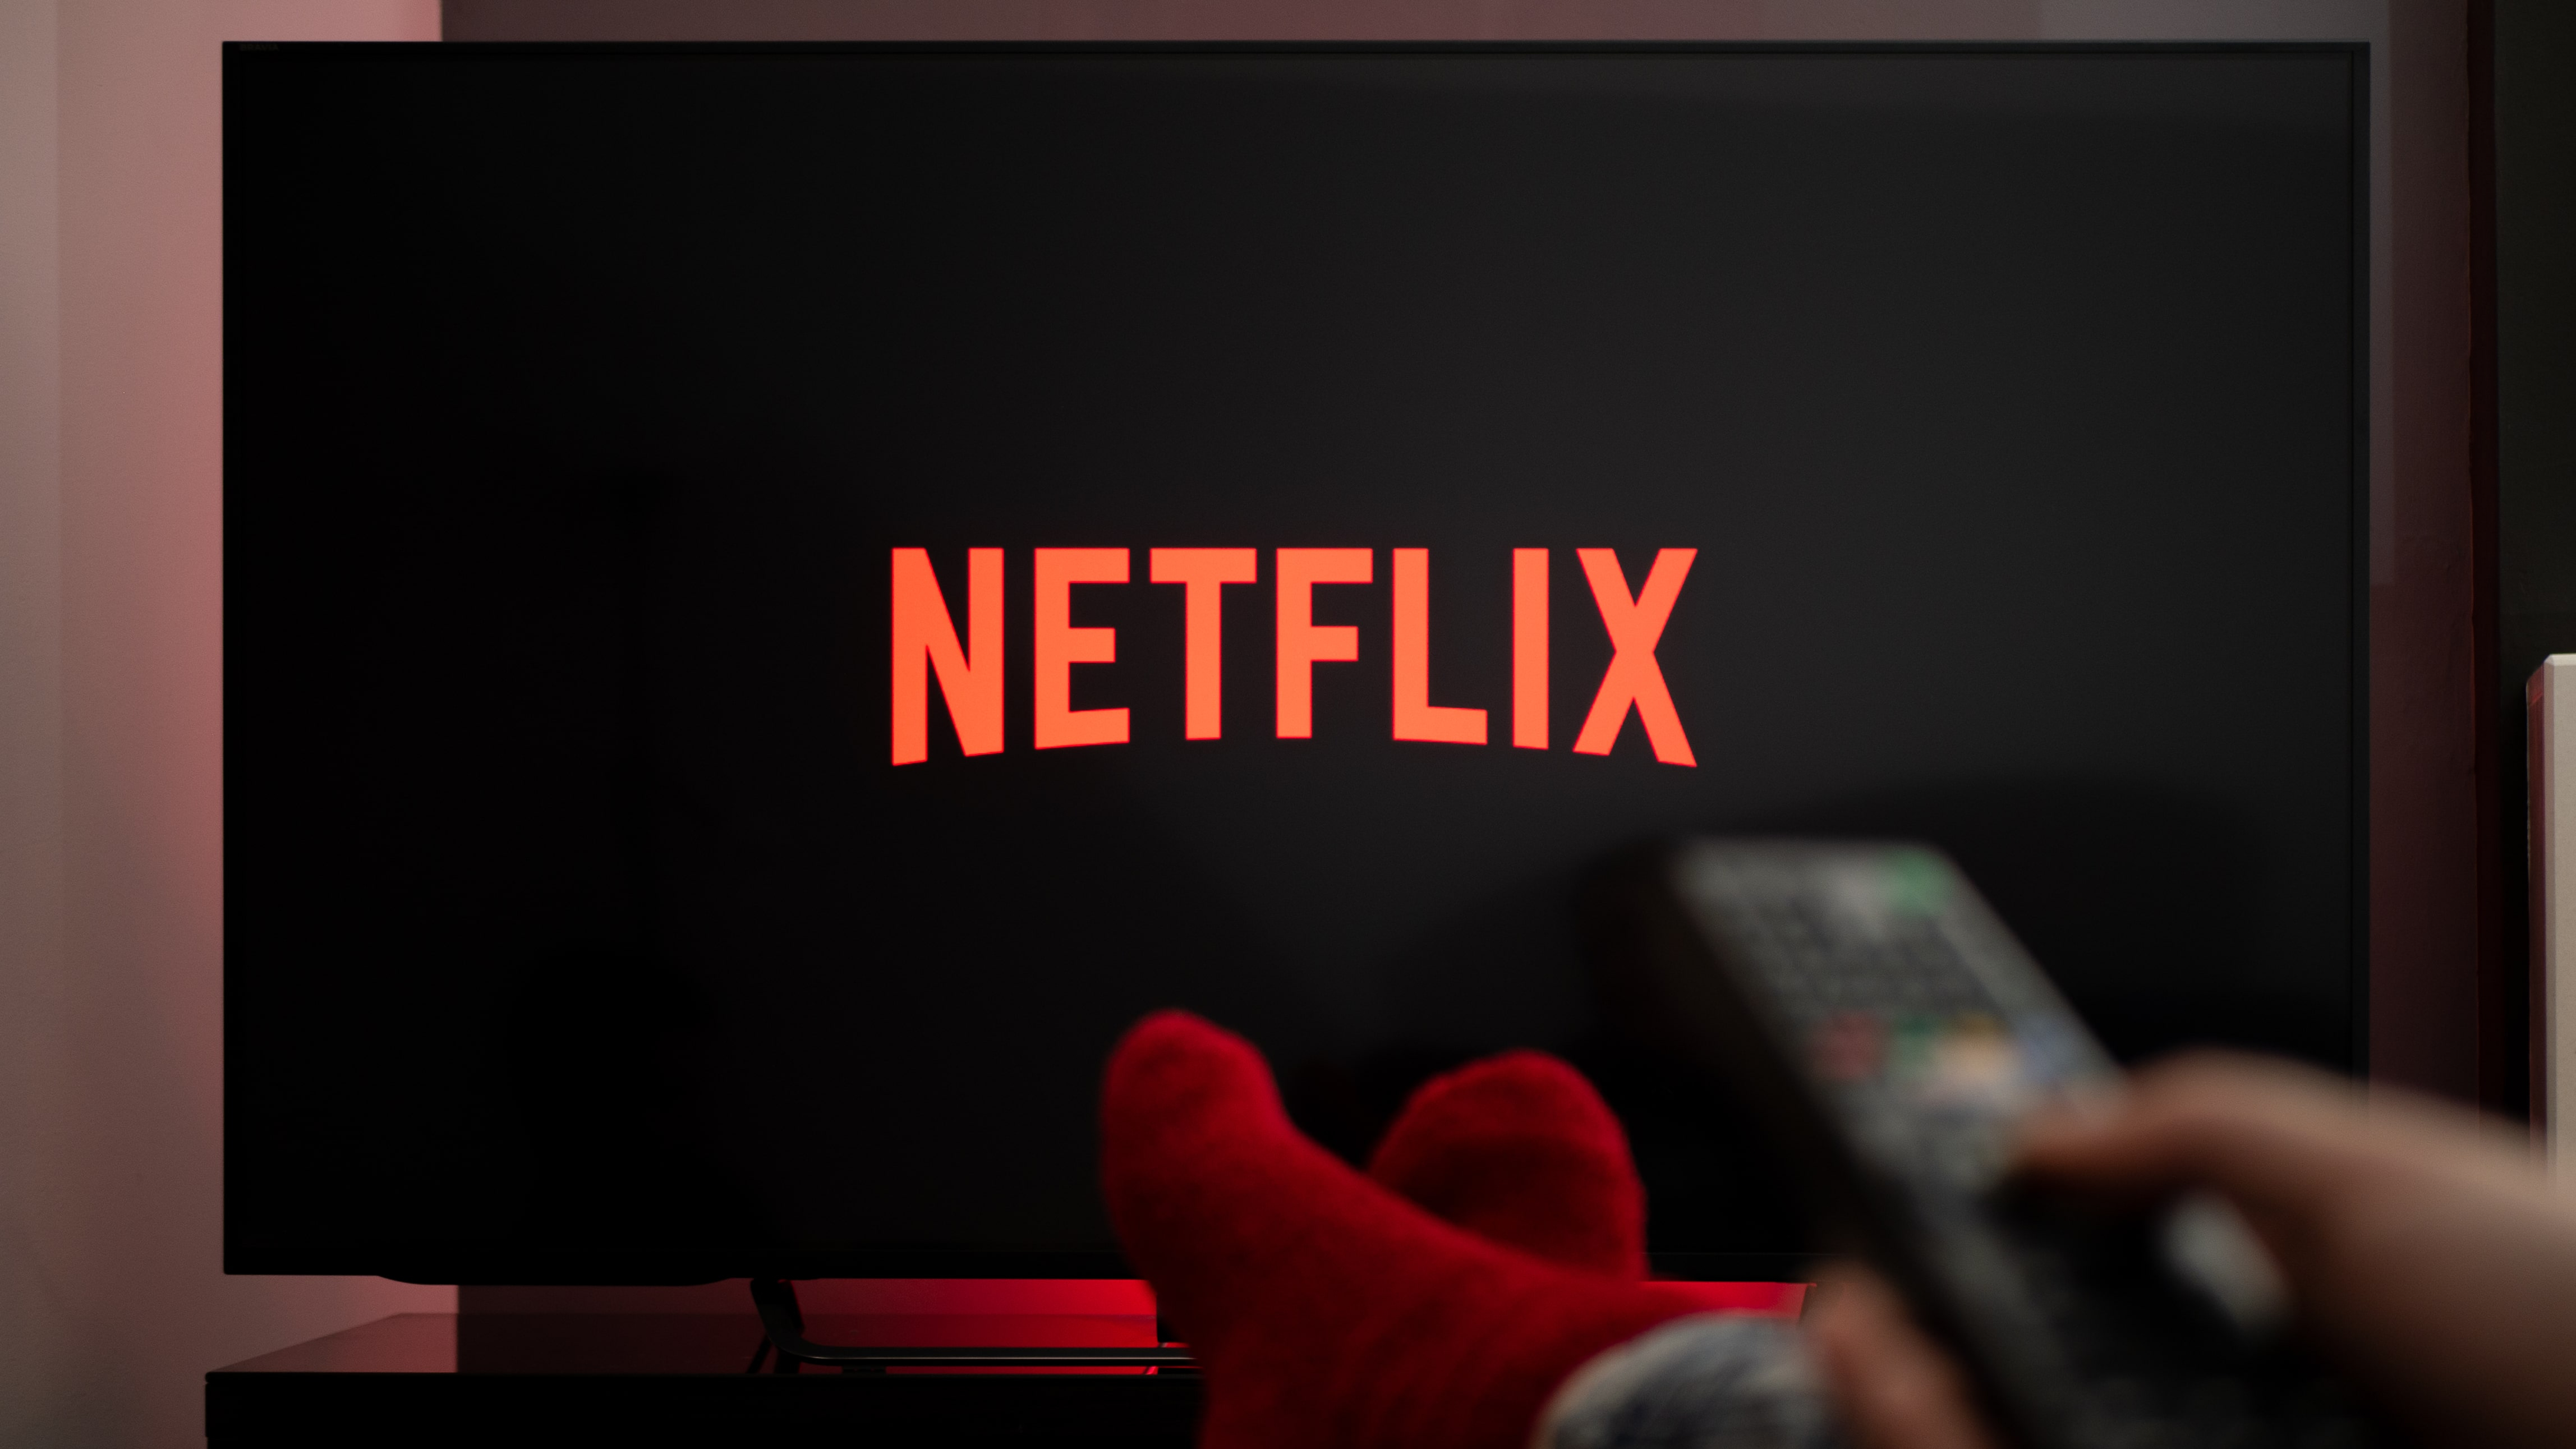 A man with his feet on the table while watching Netflix on TV